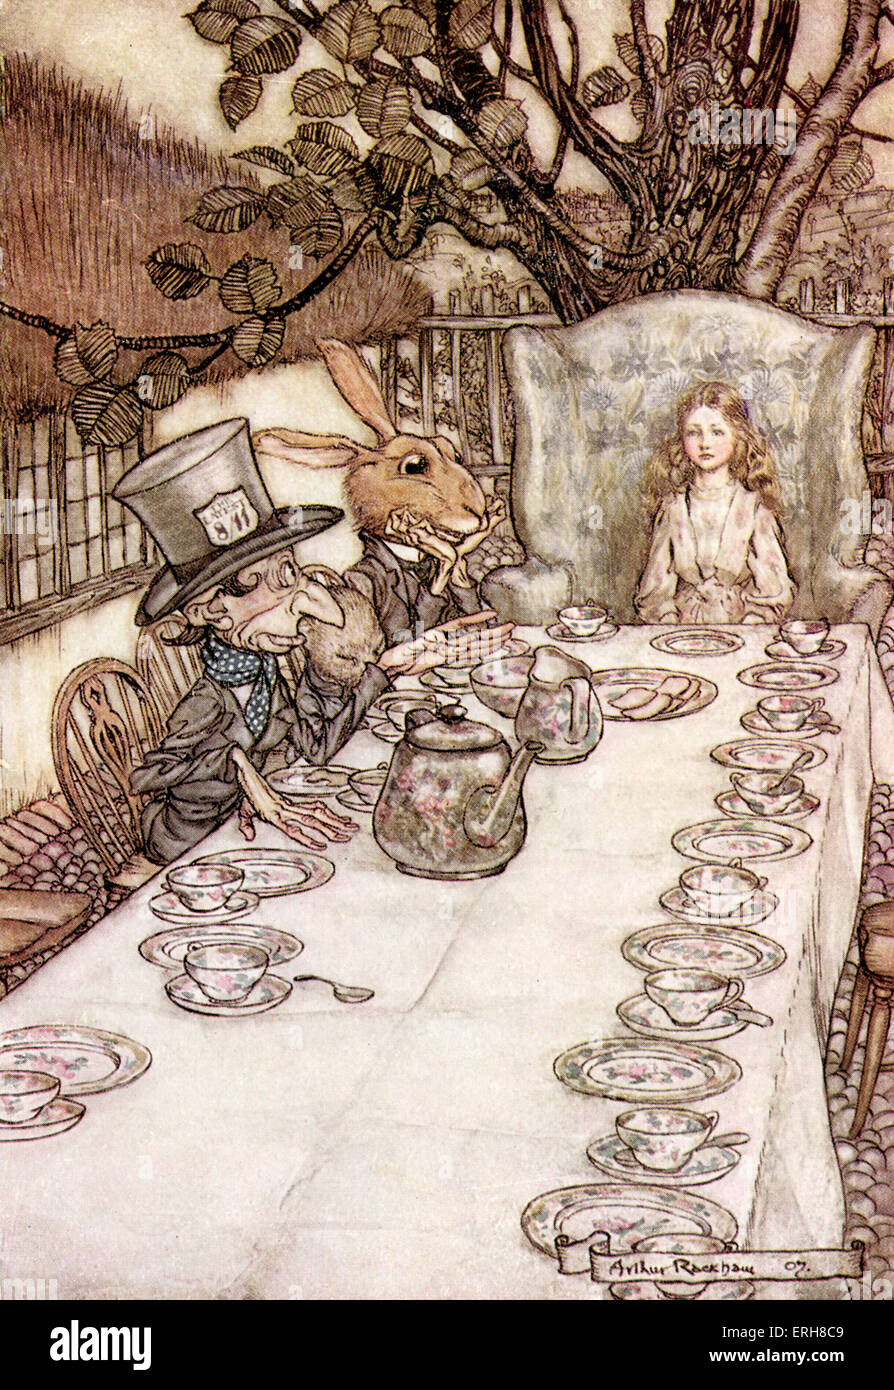 Alice 's Adventures in Wonderland by Lewis Carroll (Charles Lutwidge  Dodgson). Caption reads:'The Mad Hatter's Tea Party' Stock Photo - Alamy